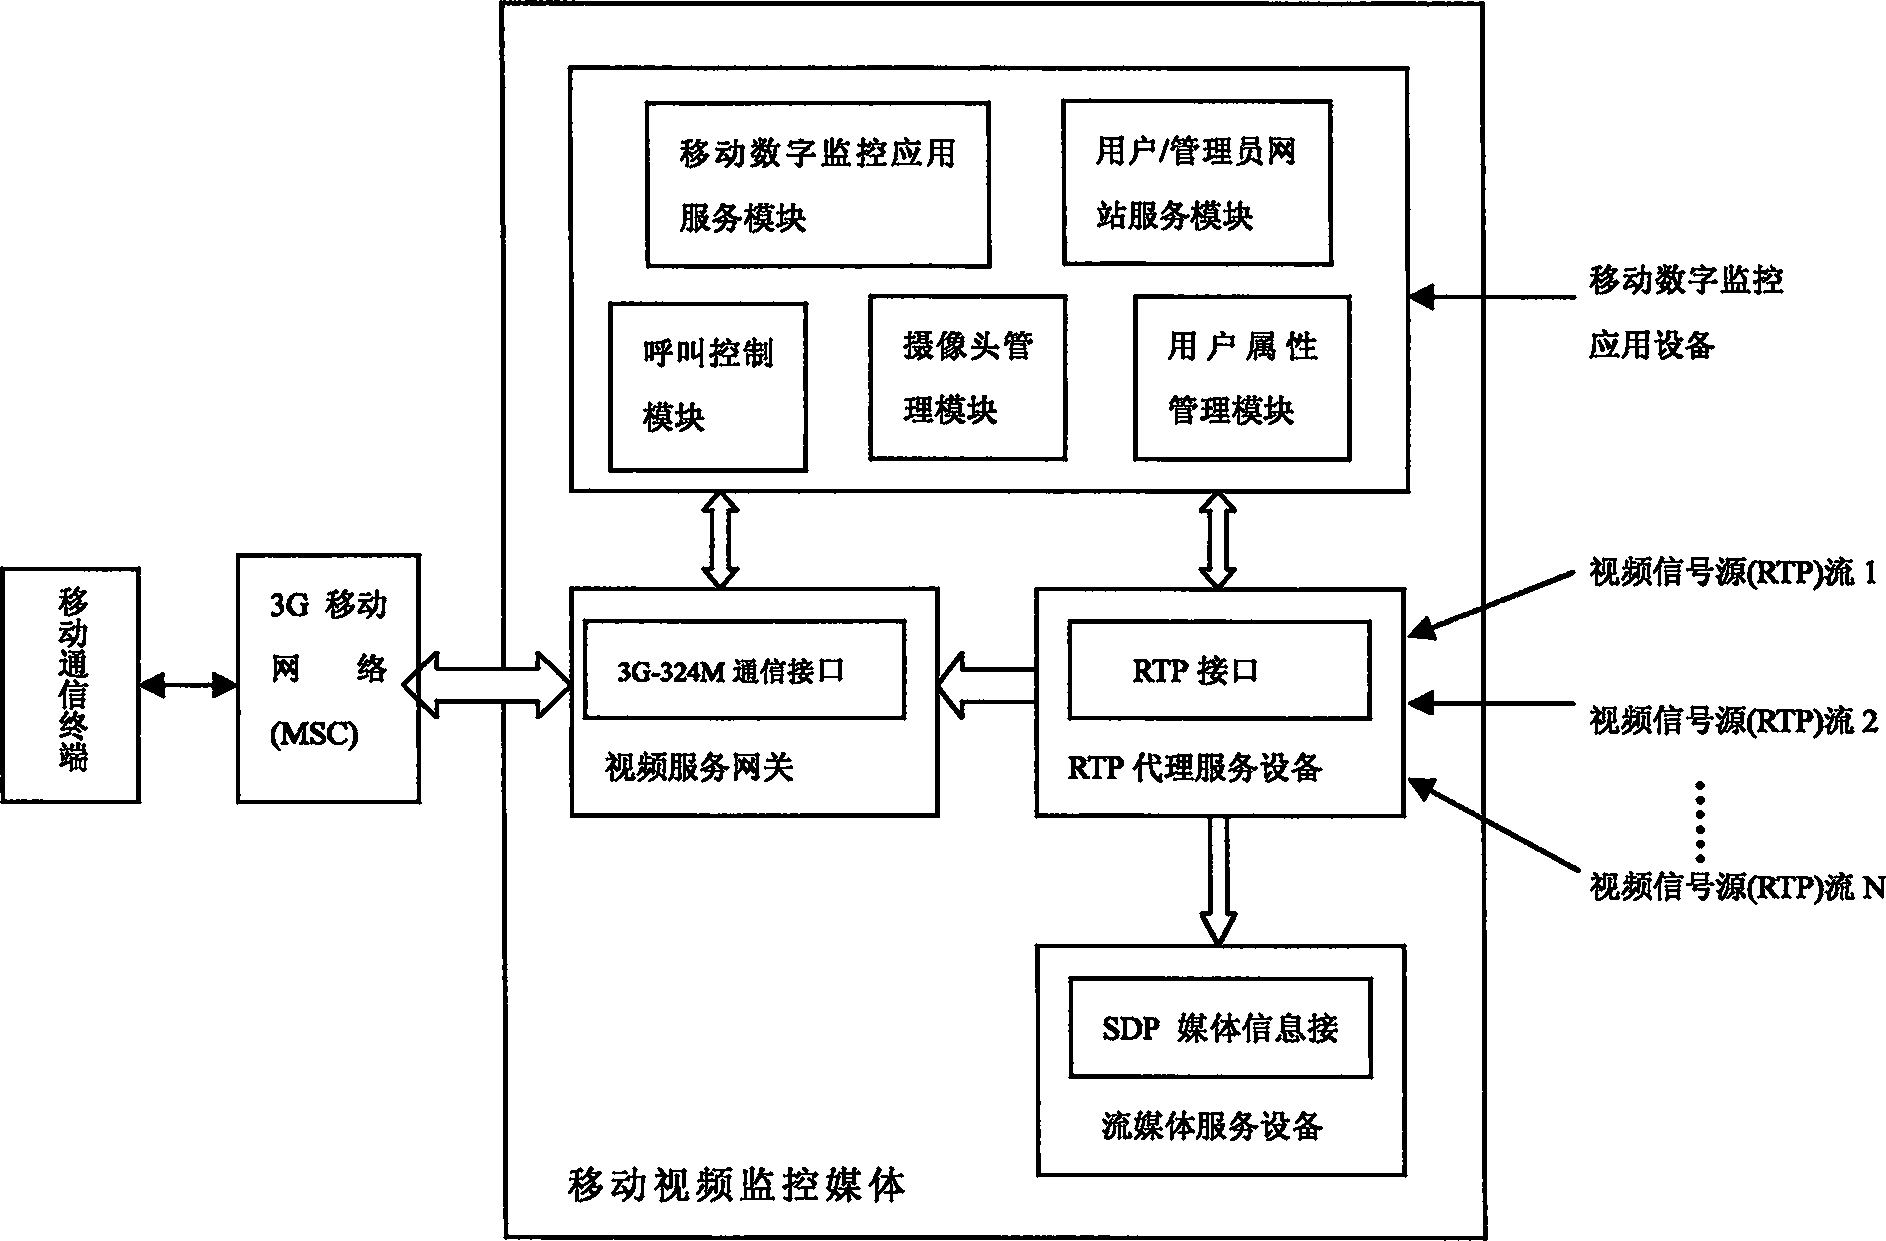 Video digital monitor and control system and method in use for 3G mobile communication